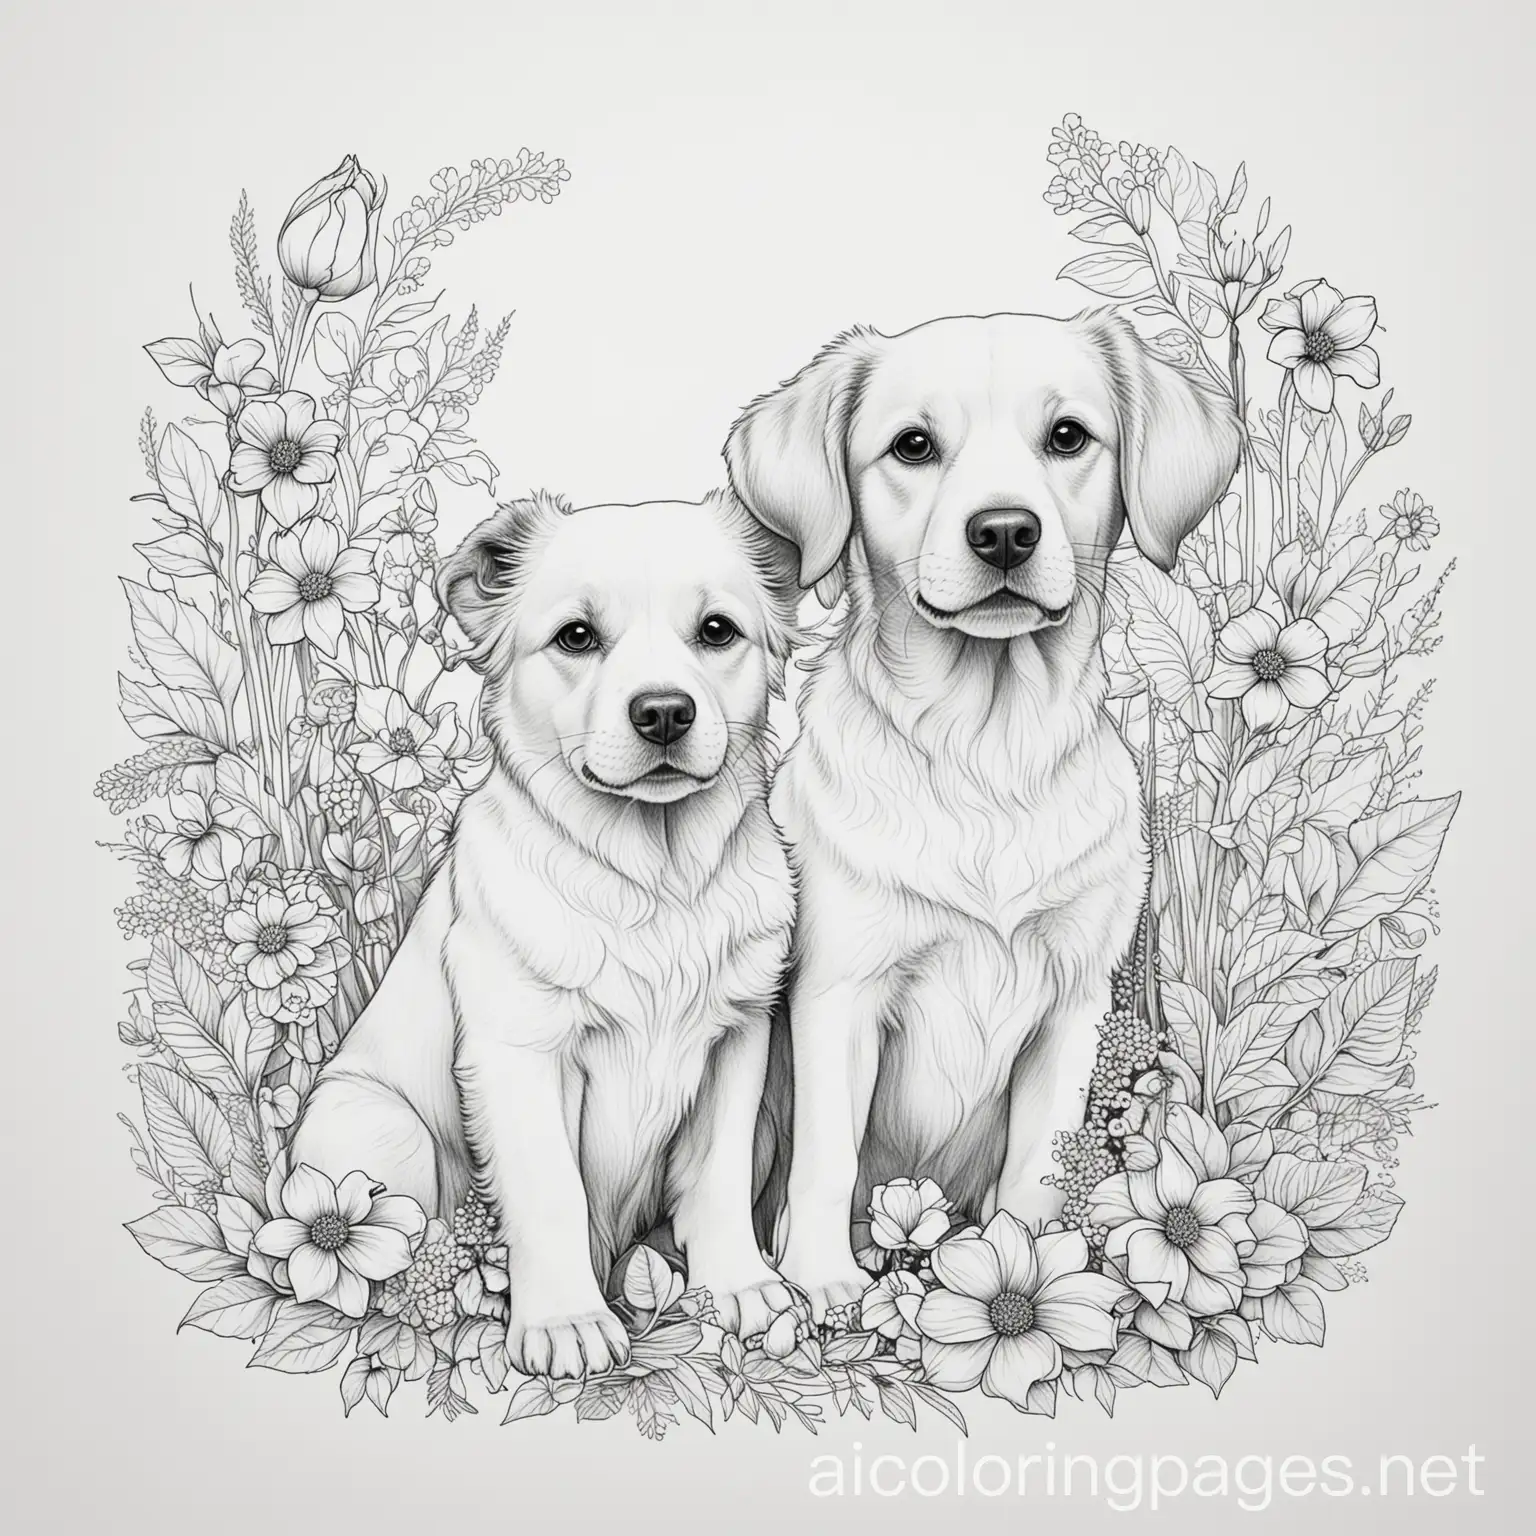 flowers and dogs, Coloring Page, black and white, line art, white background, Simplicity, Ample White Space. The background of the coloring page is plain white to make it easy for young children to color within the lines. The outlines of all the subjects are easy to distinguish, making it simple for kids to color without too much difficulty